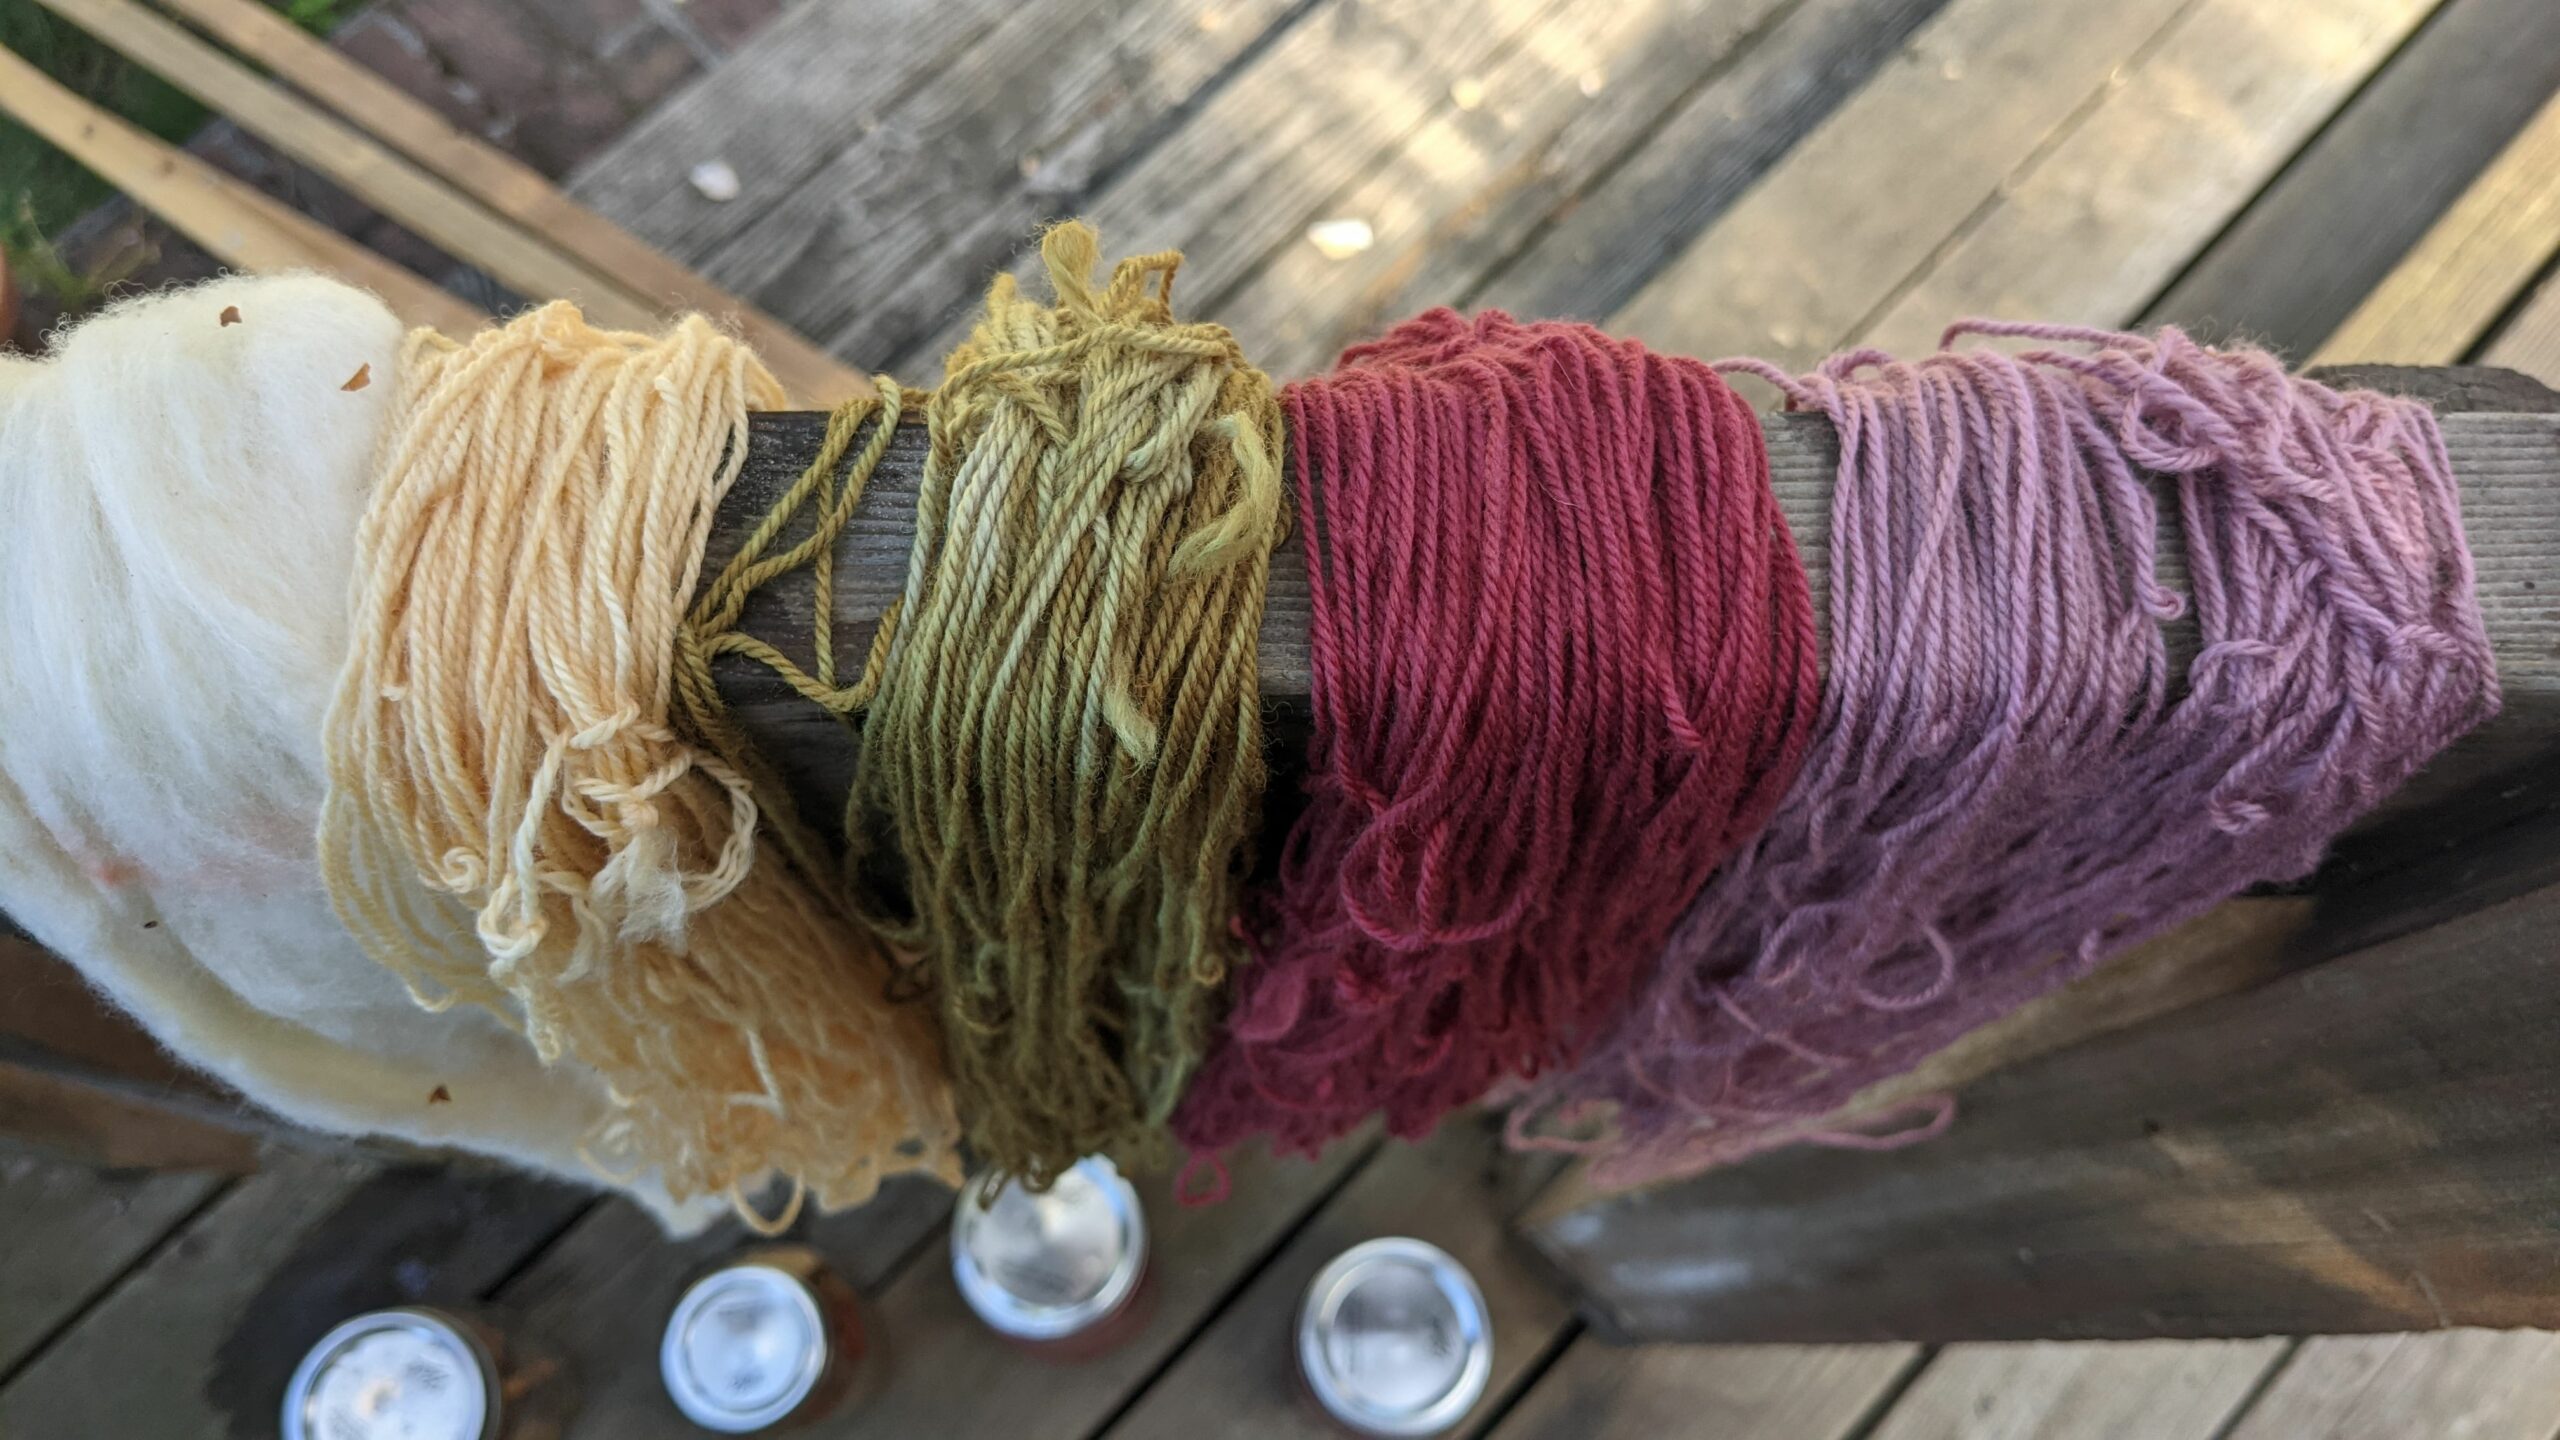 4 skeins of naturally dyed wood yarn